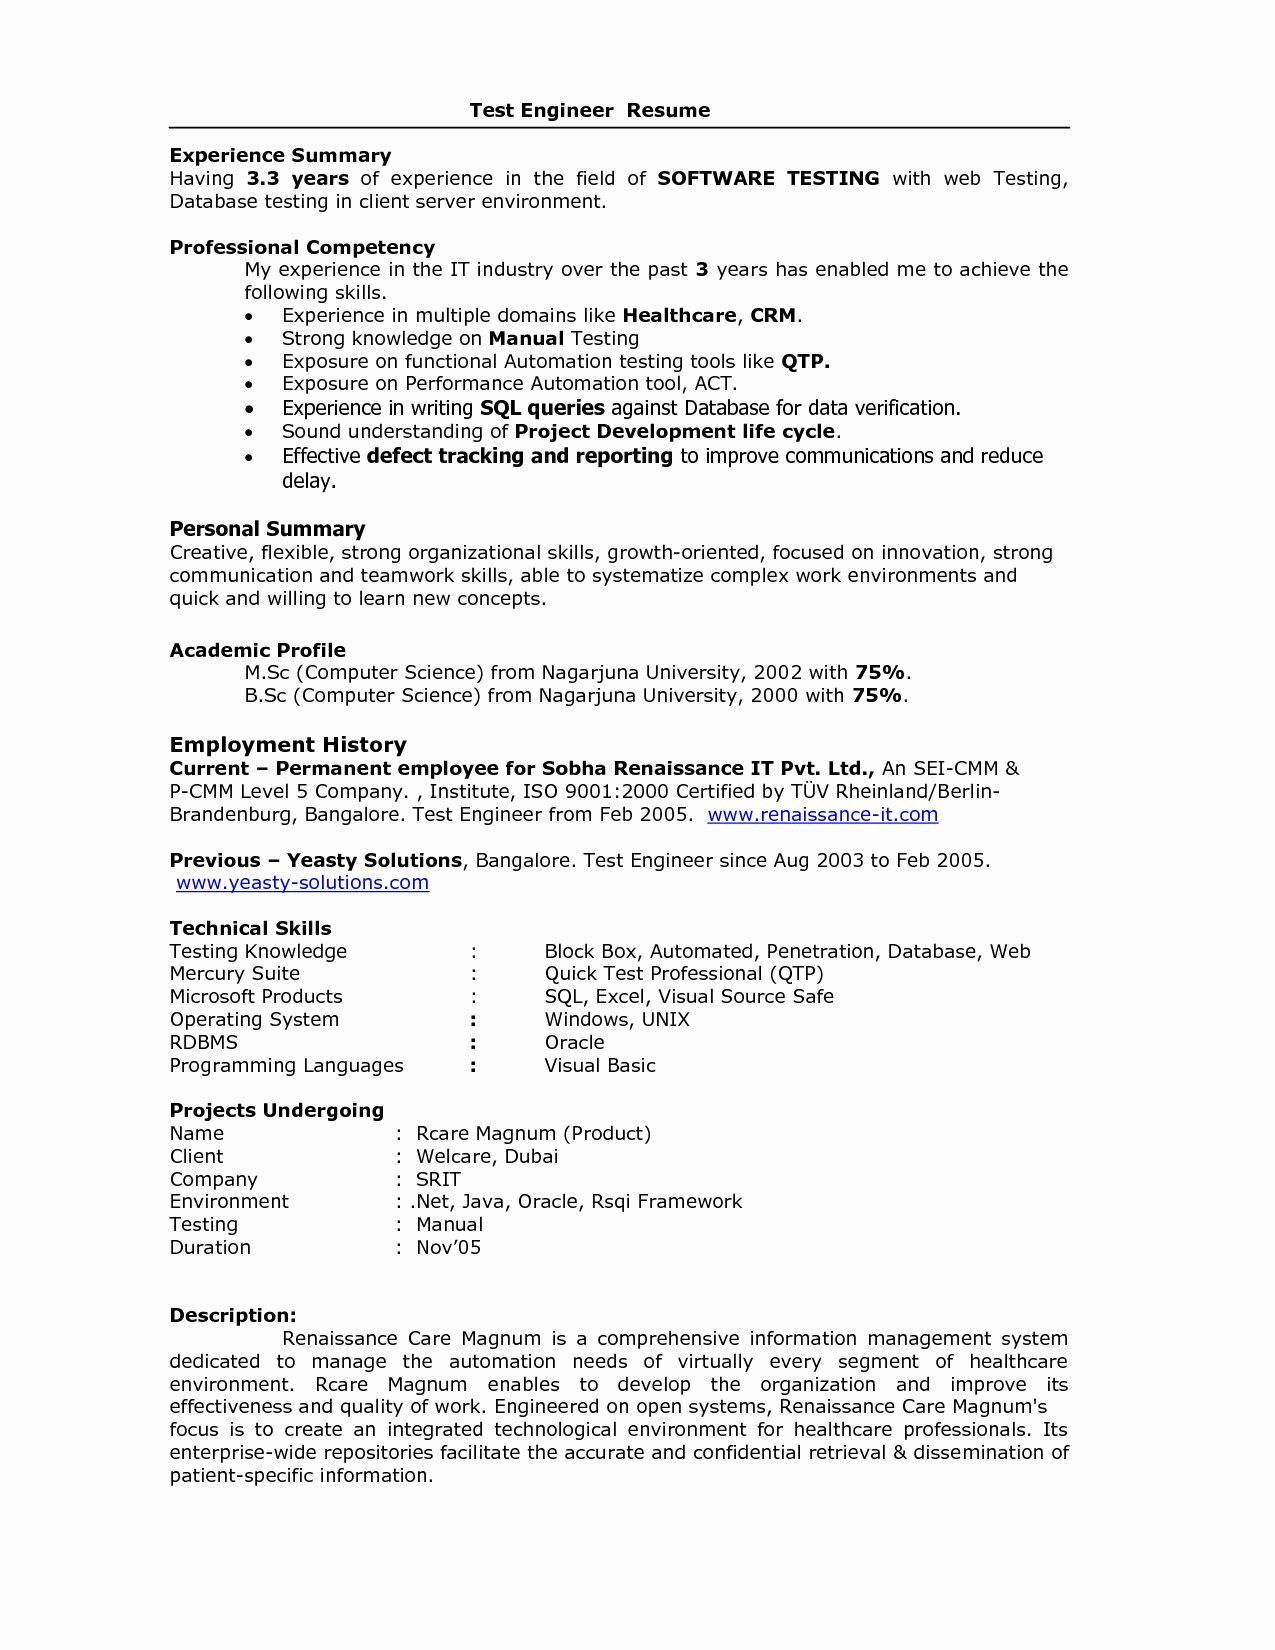 Resume Template for 3 Years Experience Resume format for 5 Years Experience In Testing , #experience …